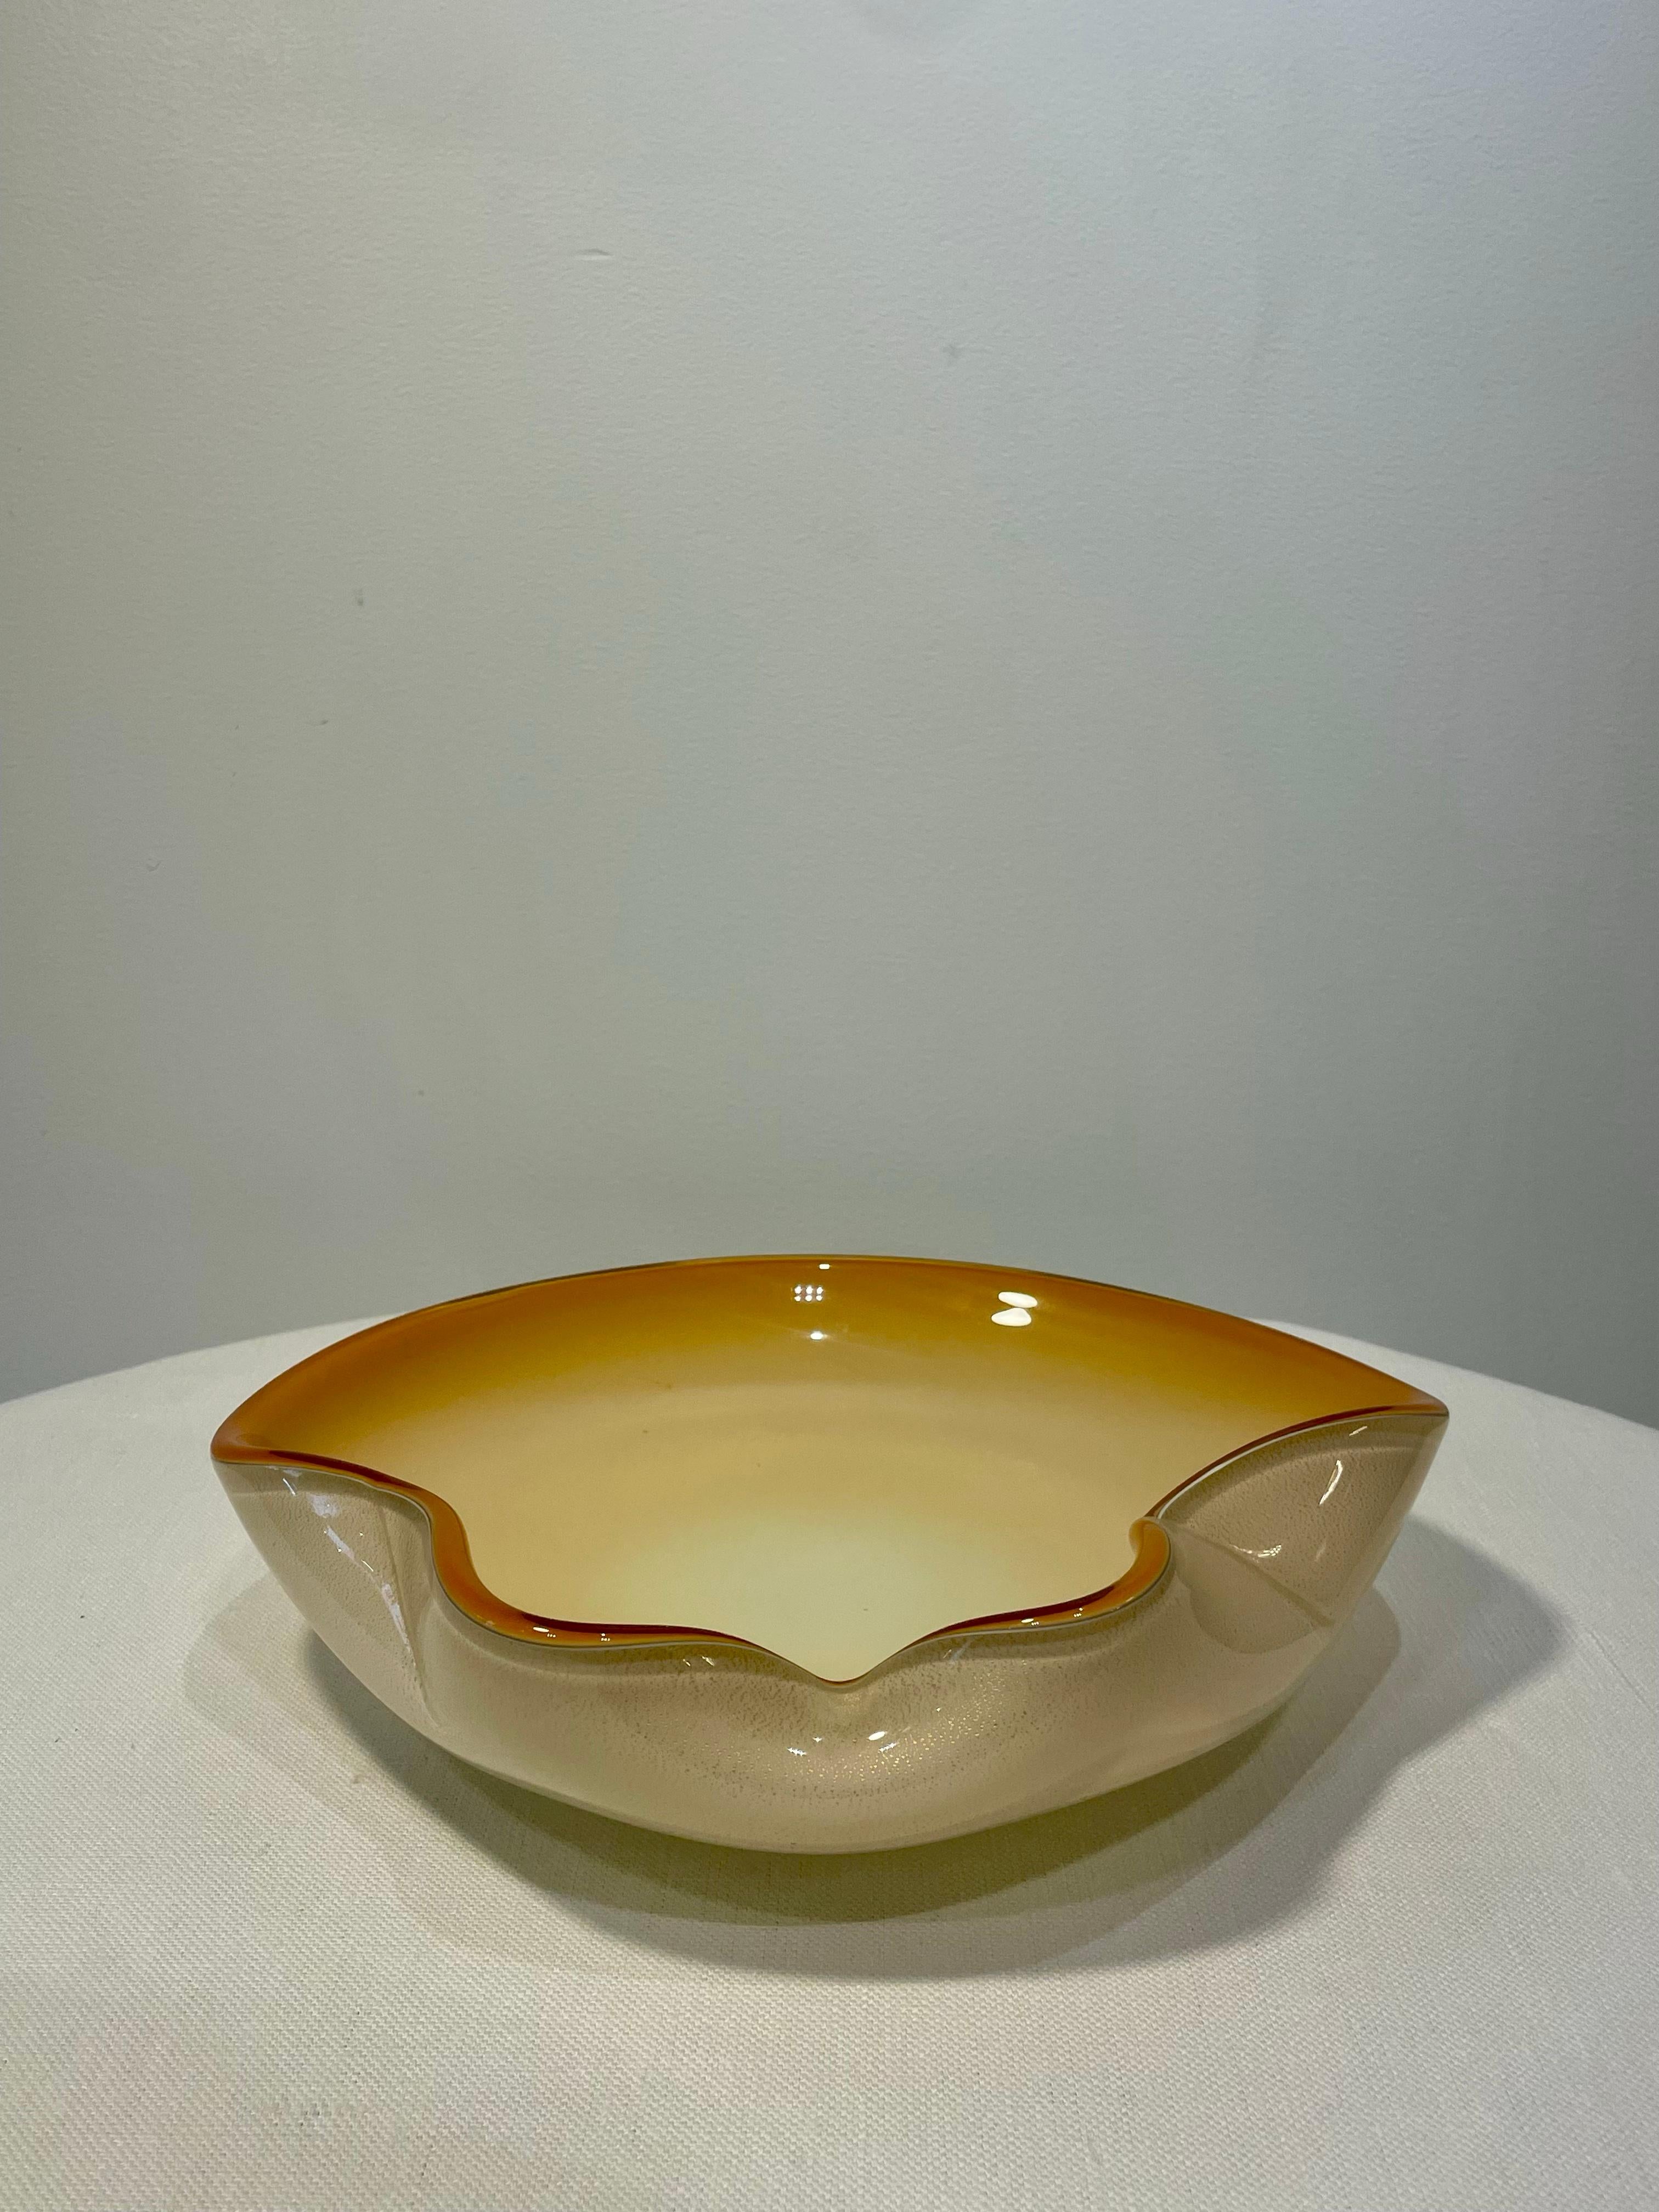 Hand-Crafted Vintage Murano Dish, Tangerine Scalloped Edges